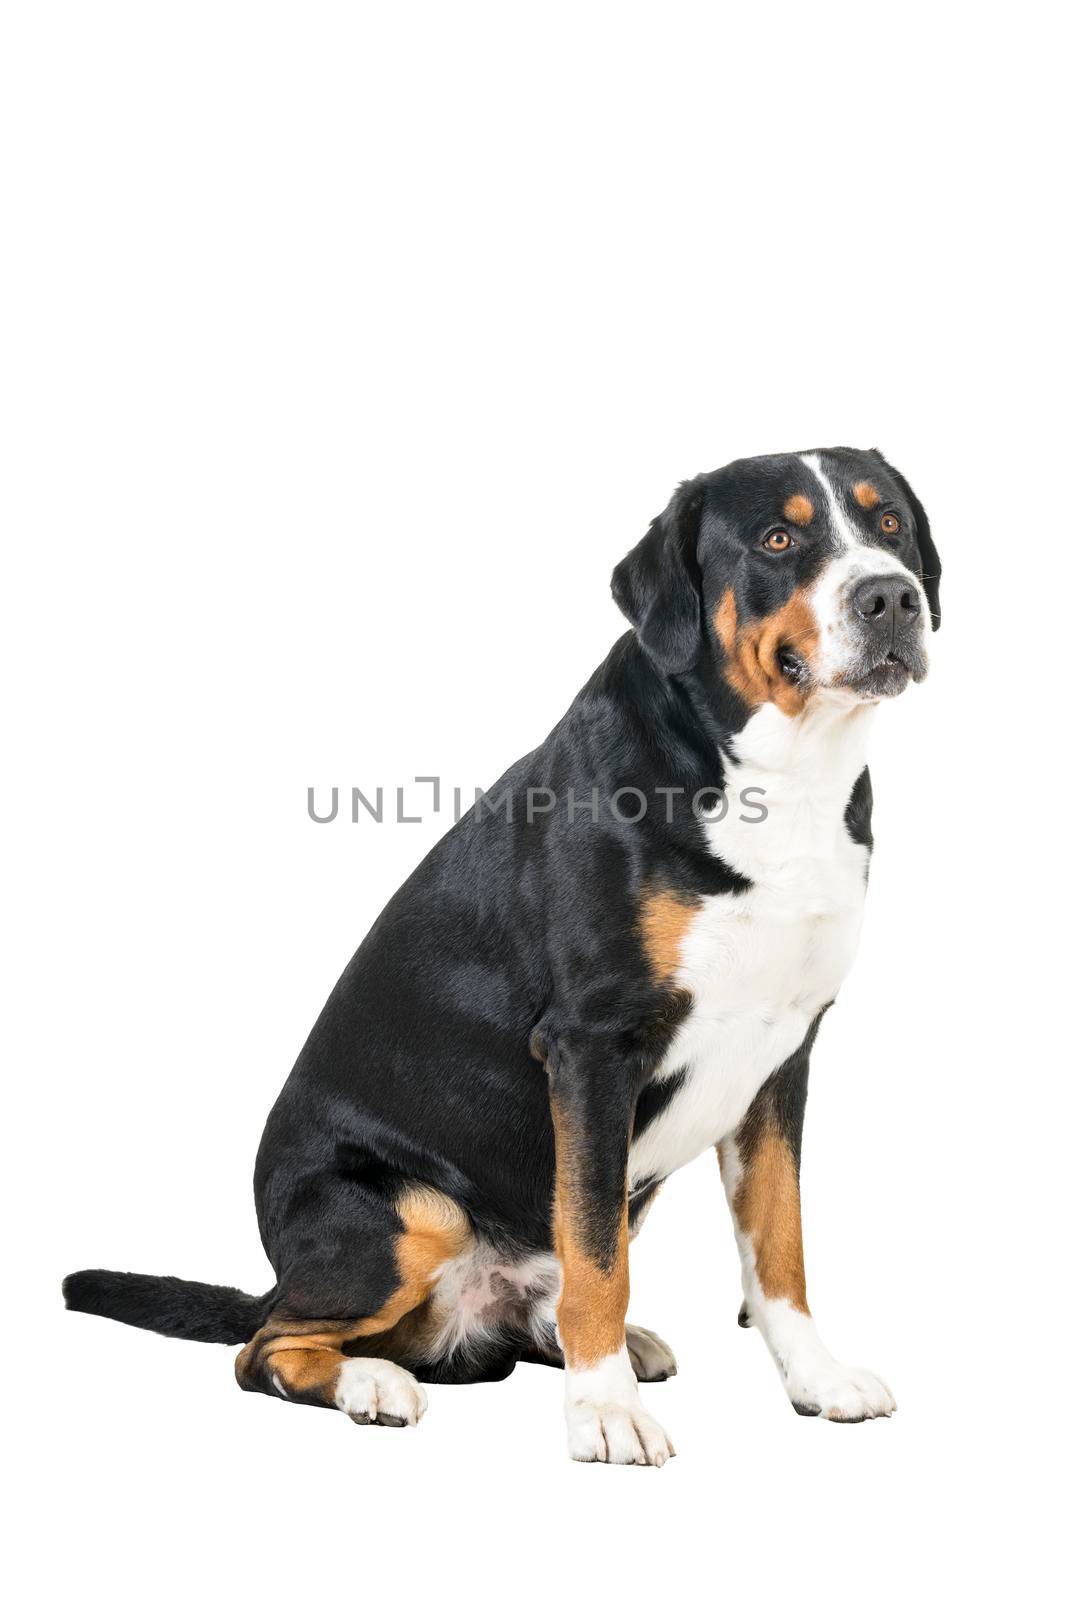 Greater Swiss Mountain Dog sitting side ways and looking next to the camera by LeoniekvanderVliet